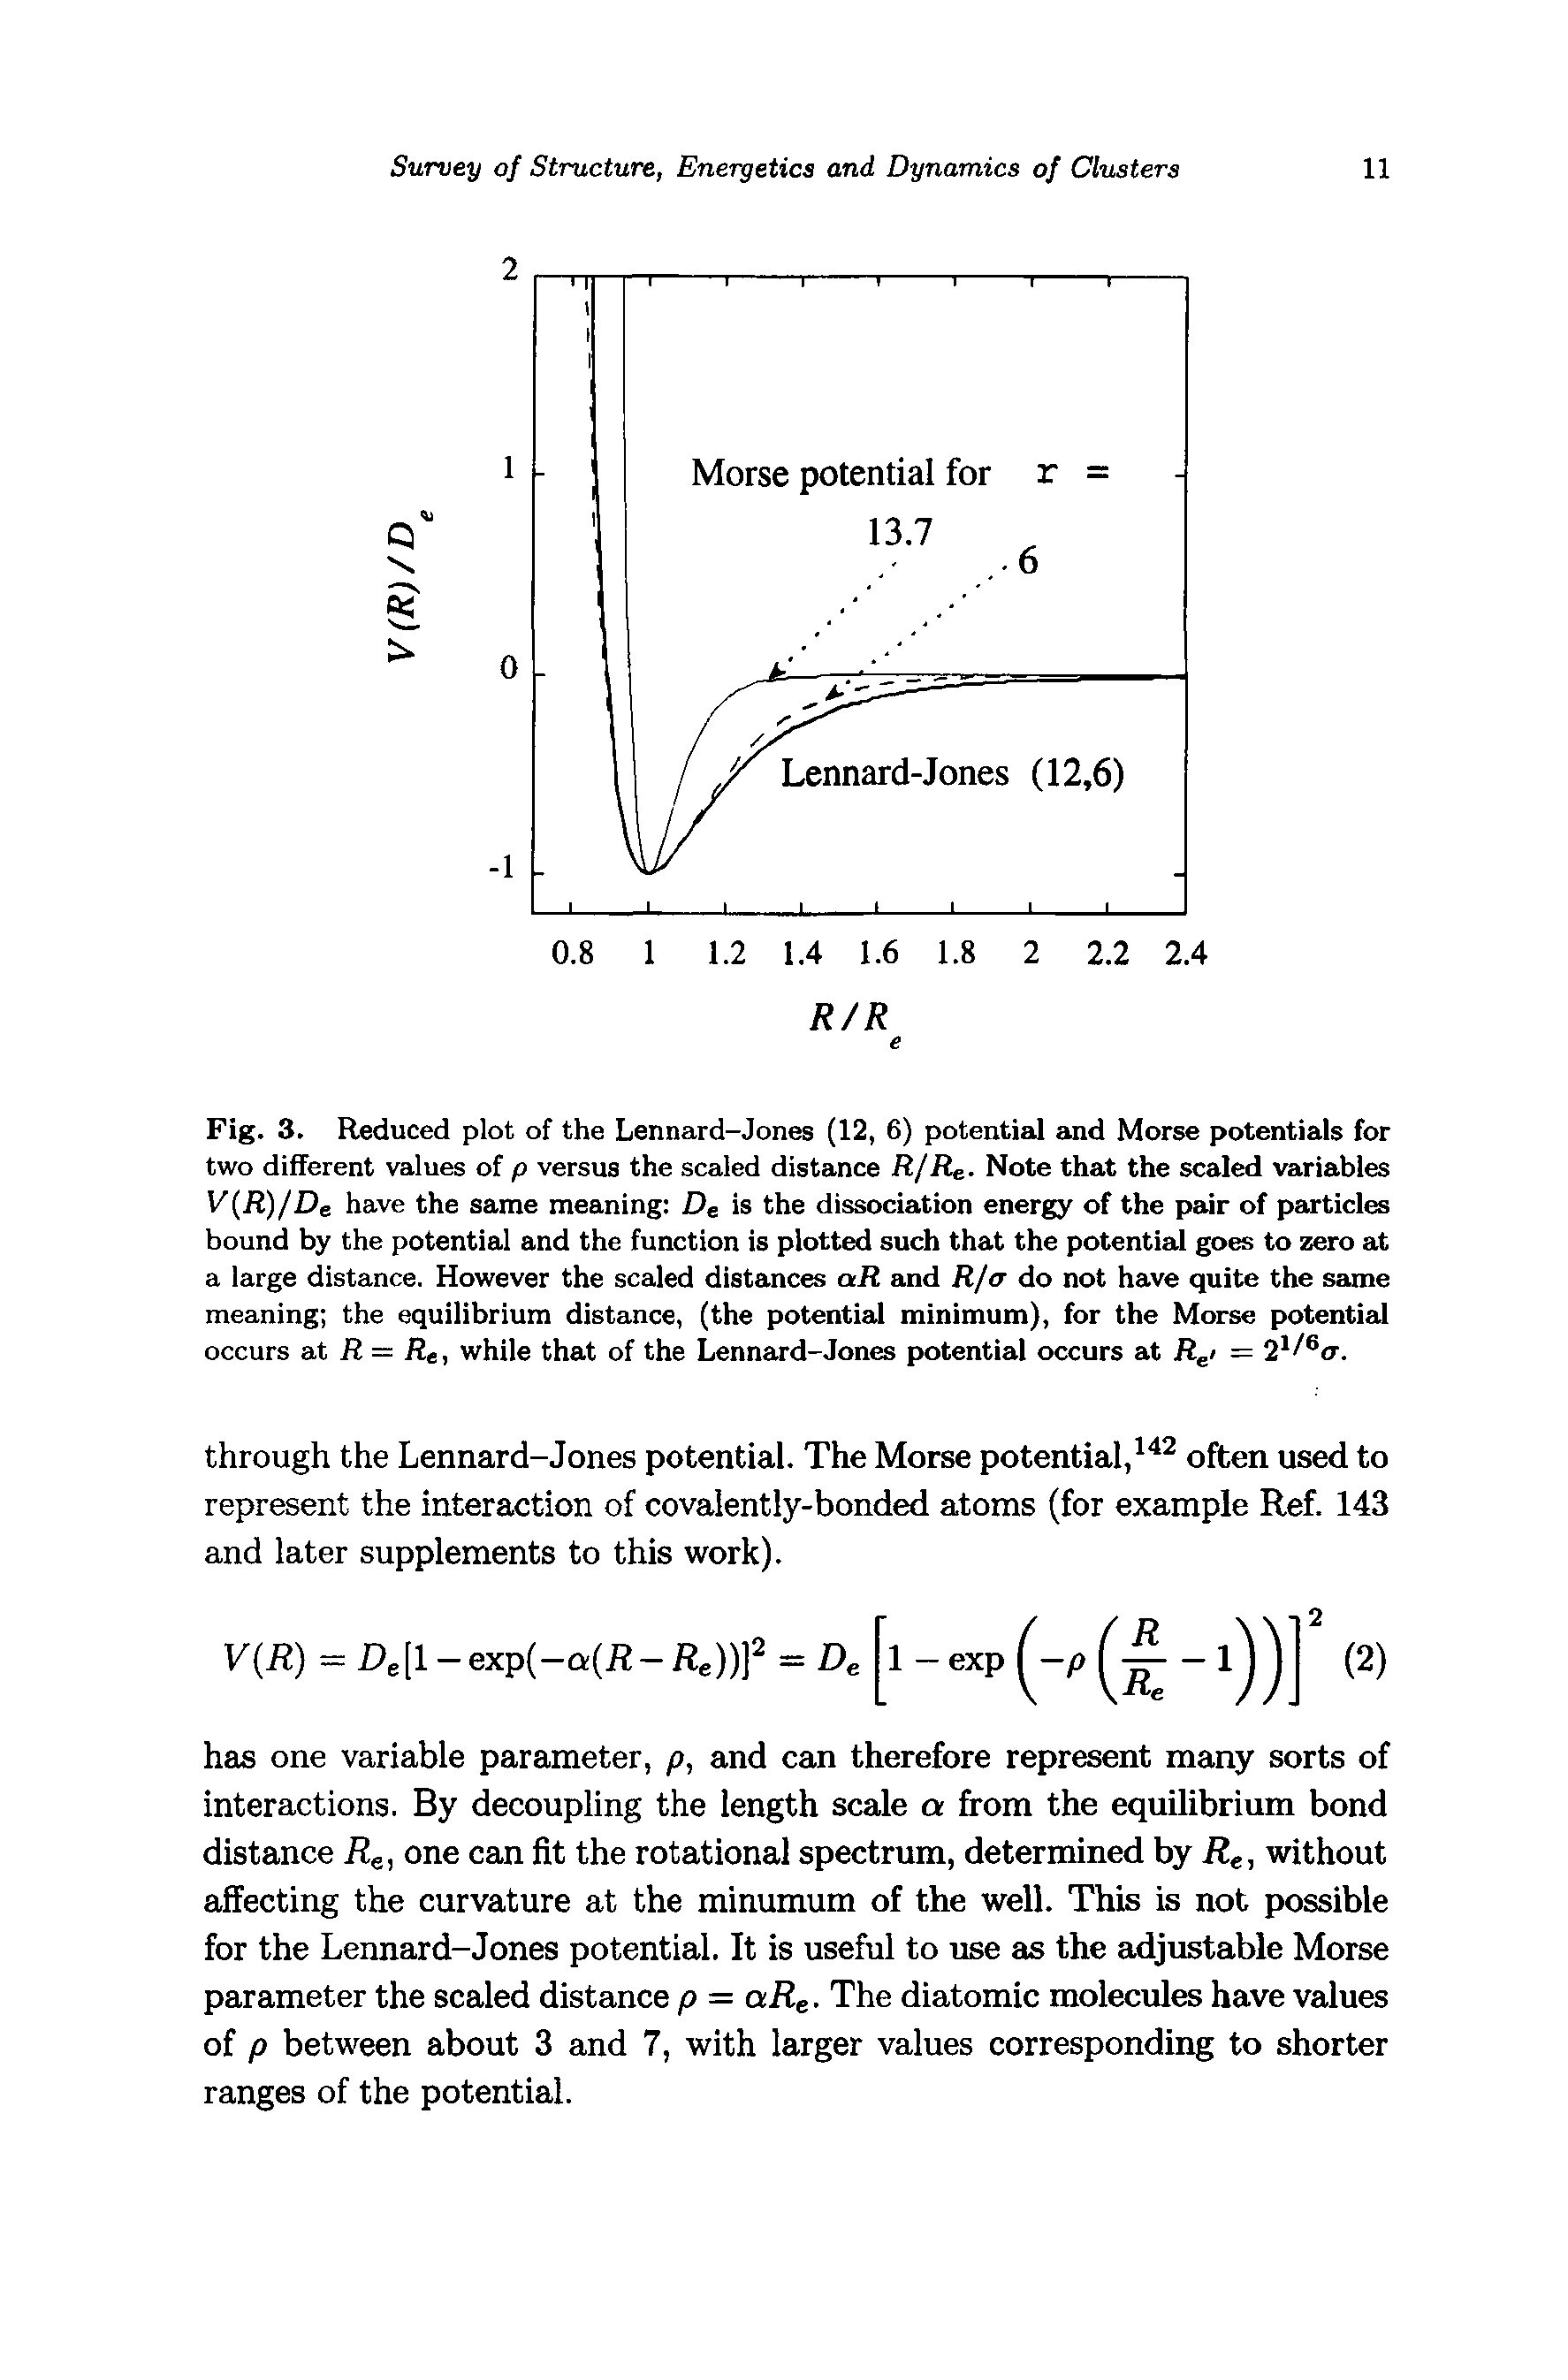 Fig. 3. Reduced plot of the Lennard-Jones (12, 6) potentiaj and Morse potentials for two different values of p versus the scaled distance R/Re. Note that the scaled variables V(R)/De have the same meaning De is the dissociation energy of the pair of particles bound by the potential and the function is plotted such that the potential goes to zero at a large distance. However the scaled distances oiR and R/tr do not have quite the same meaning the equilibrium distance, (the potential minimum), for the Morse potential occurs at R = Re, while that of the Lennard-Jones potential occurs at R i =...